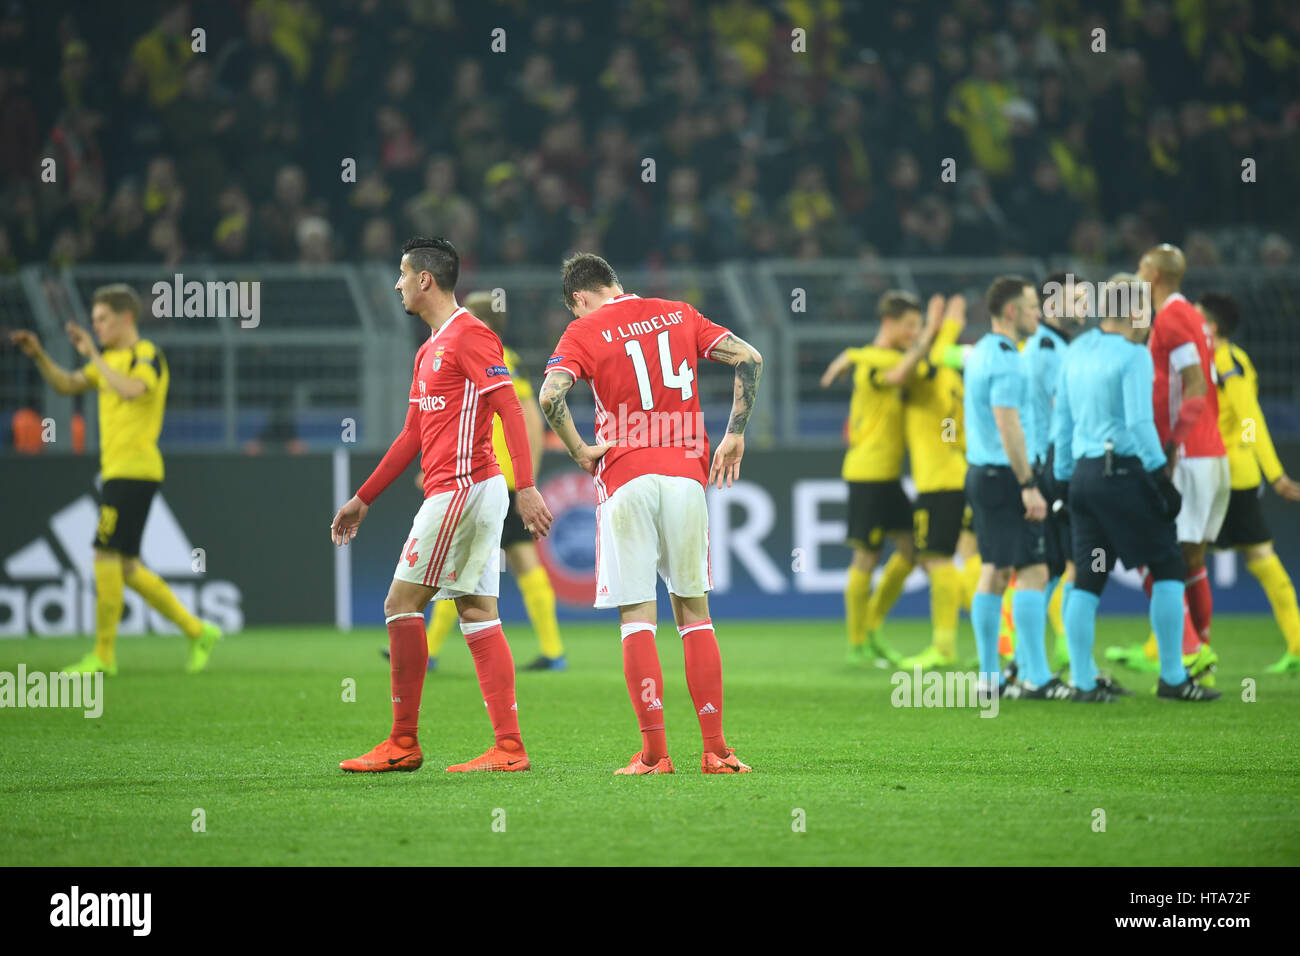 Dortmund, Germany. 08th Mar, 2017. Lisbon's Victor Lindelof (C) standing on the pitch after the UEFA Champions League round of 16 second-leg soccer match between Borussia Dortmund and S.L. Benfica at Signal Iduna Park in Dortmund, Germany, 08 March 2017. Photo: Bernd Thissen/dpa/Alamy Live News Stock Photo